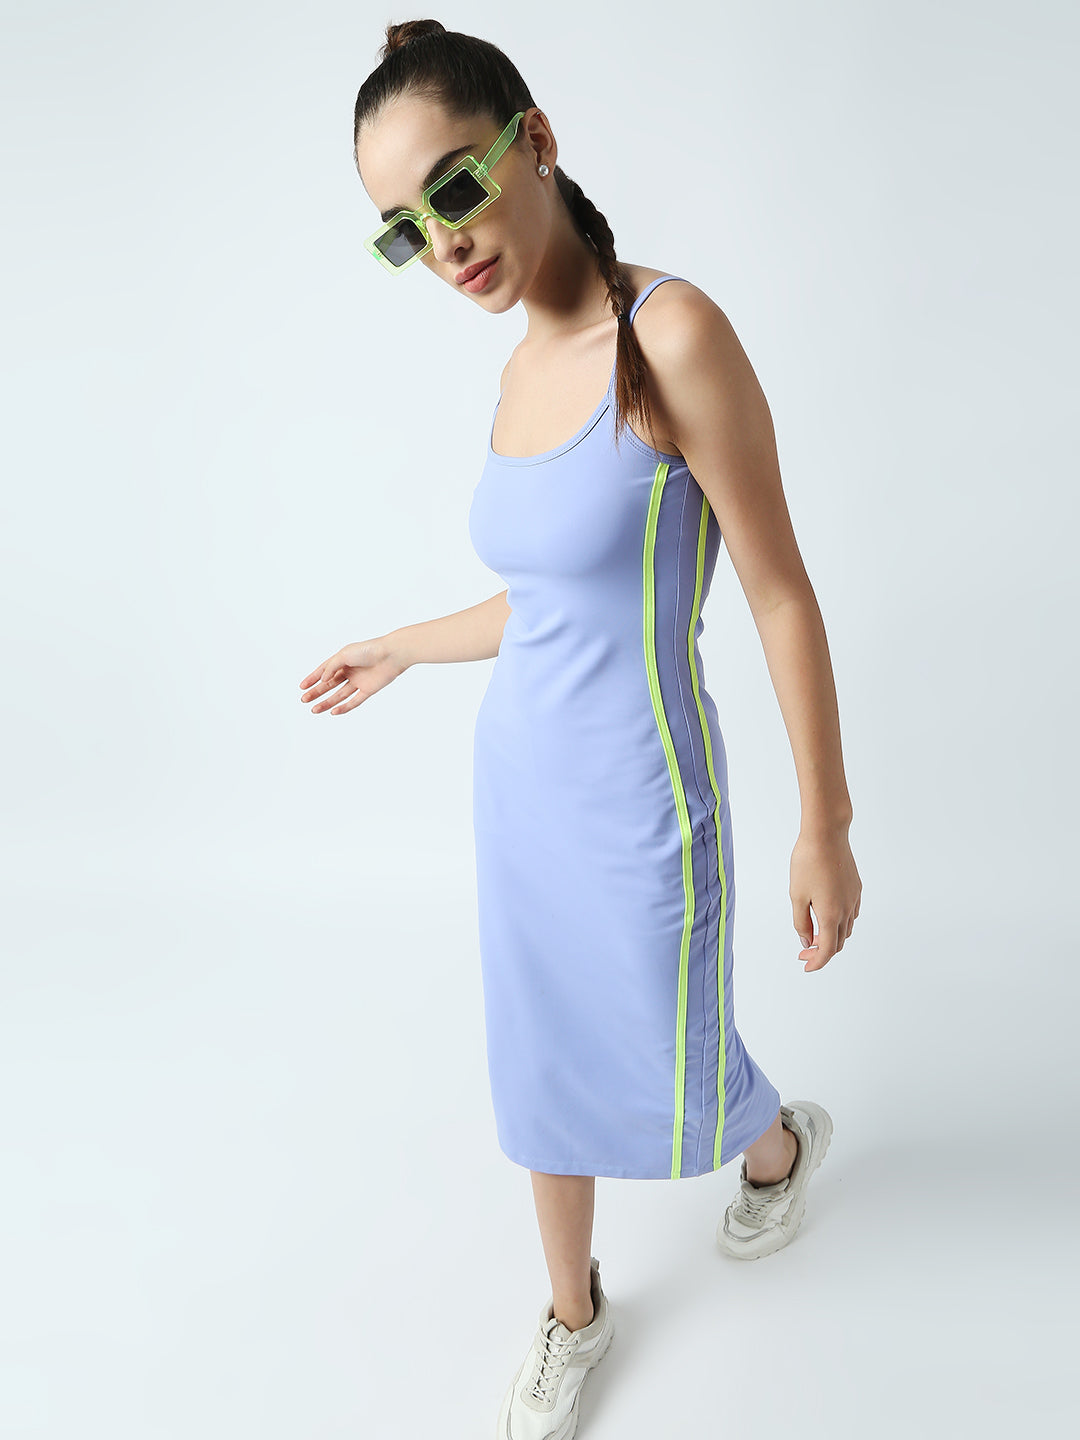 Disrupt Women Blue Strappy Midi Dress With Contrast Side Piping